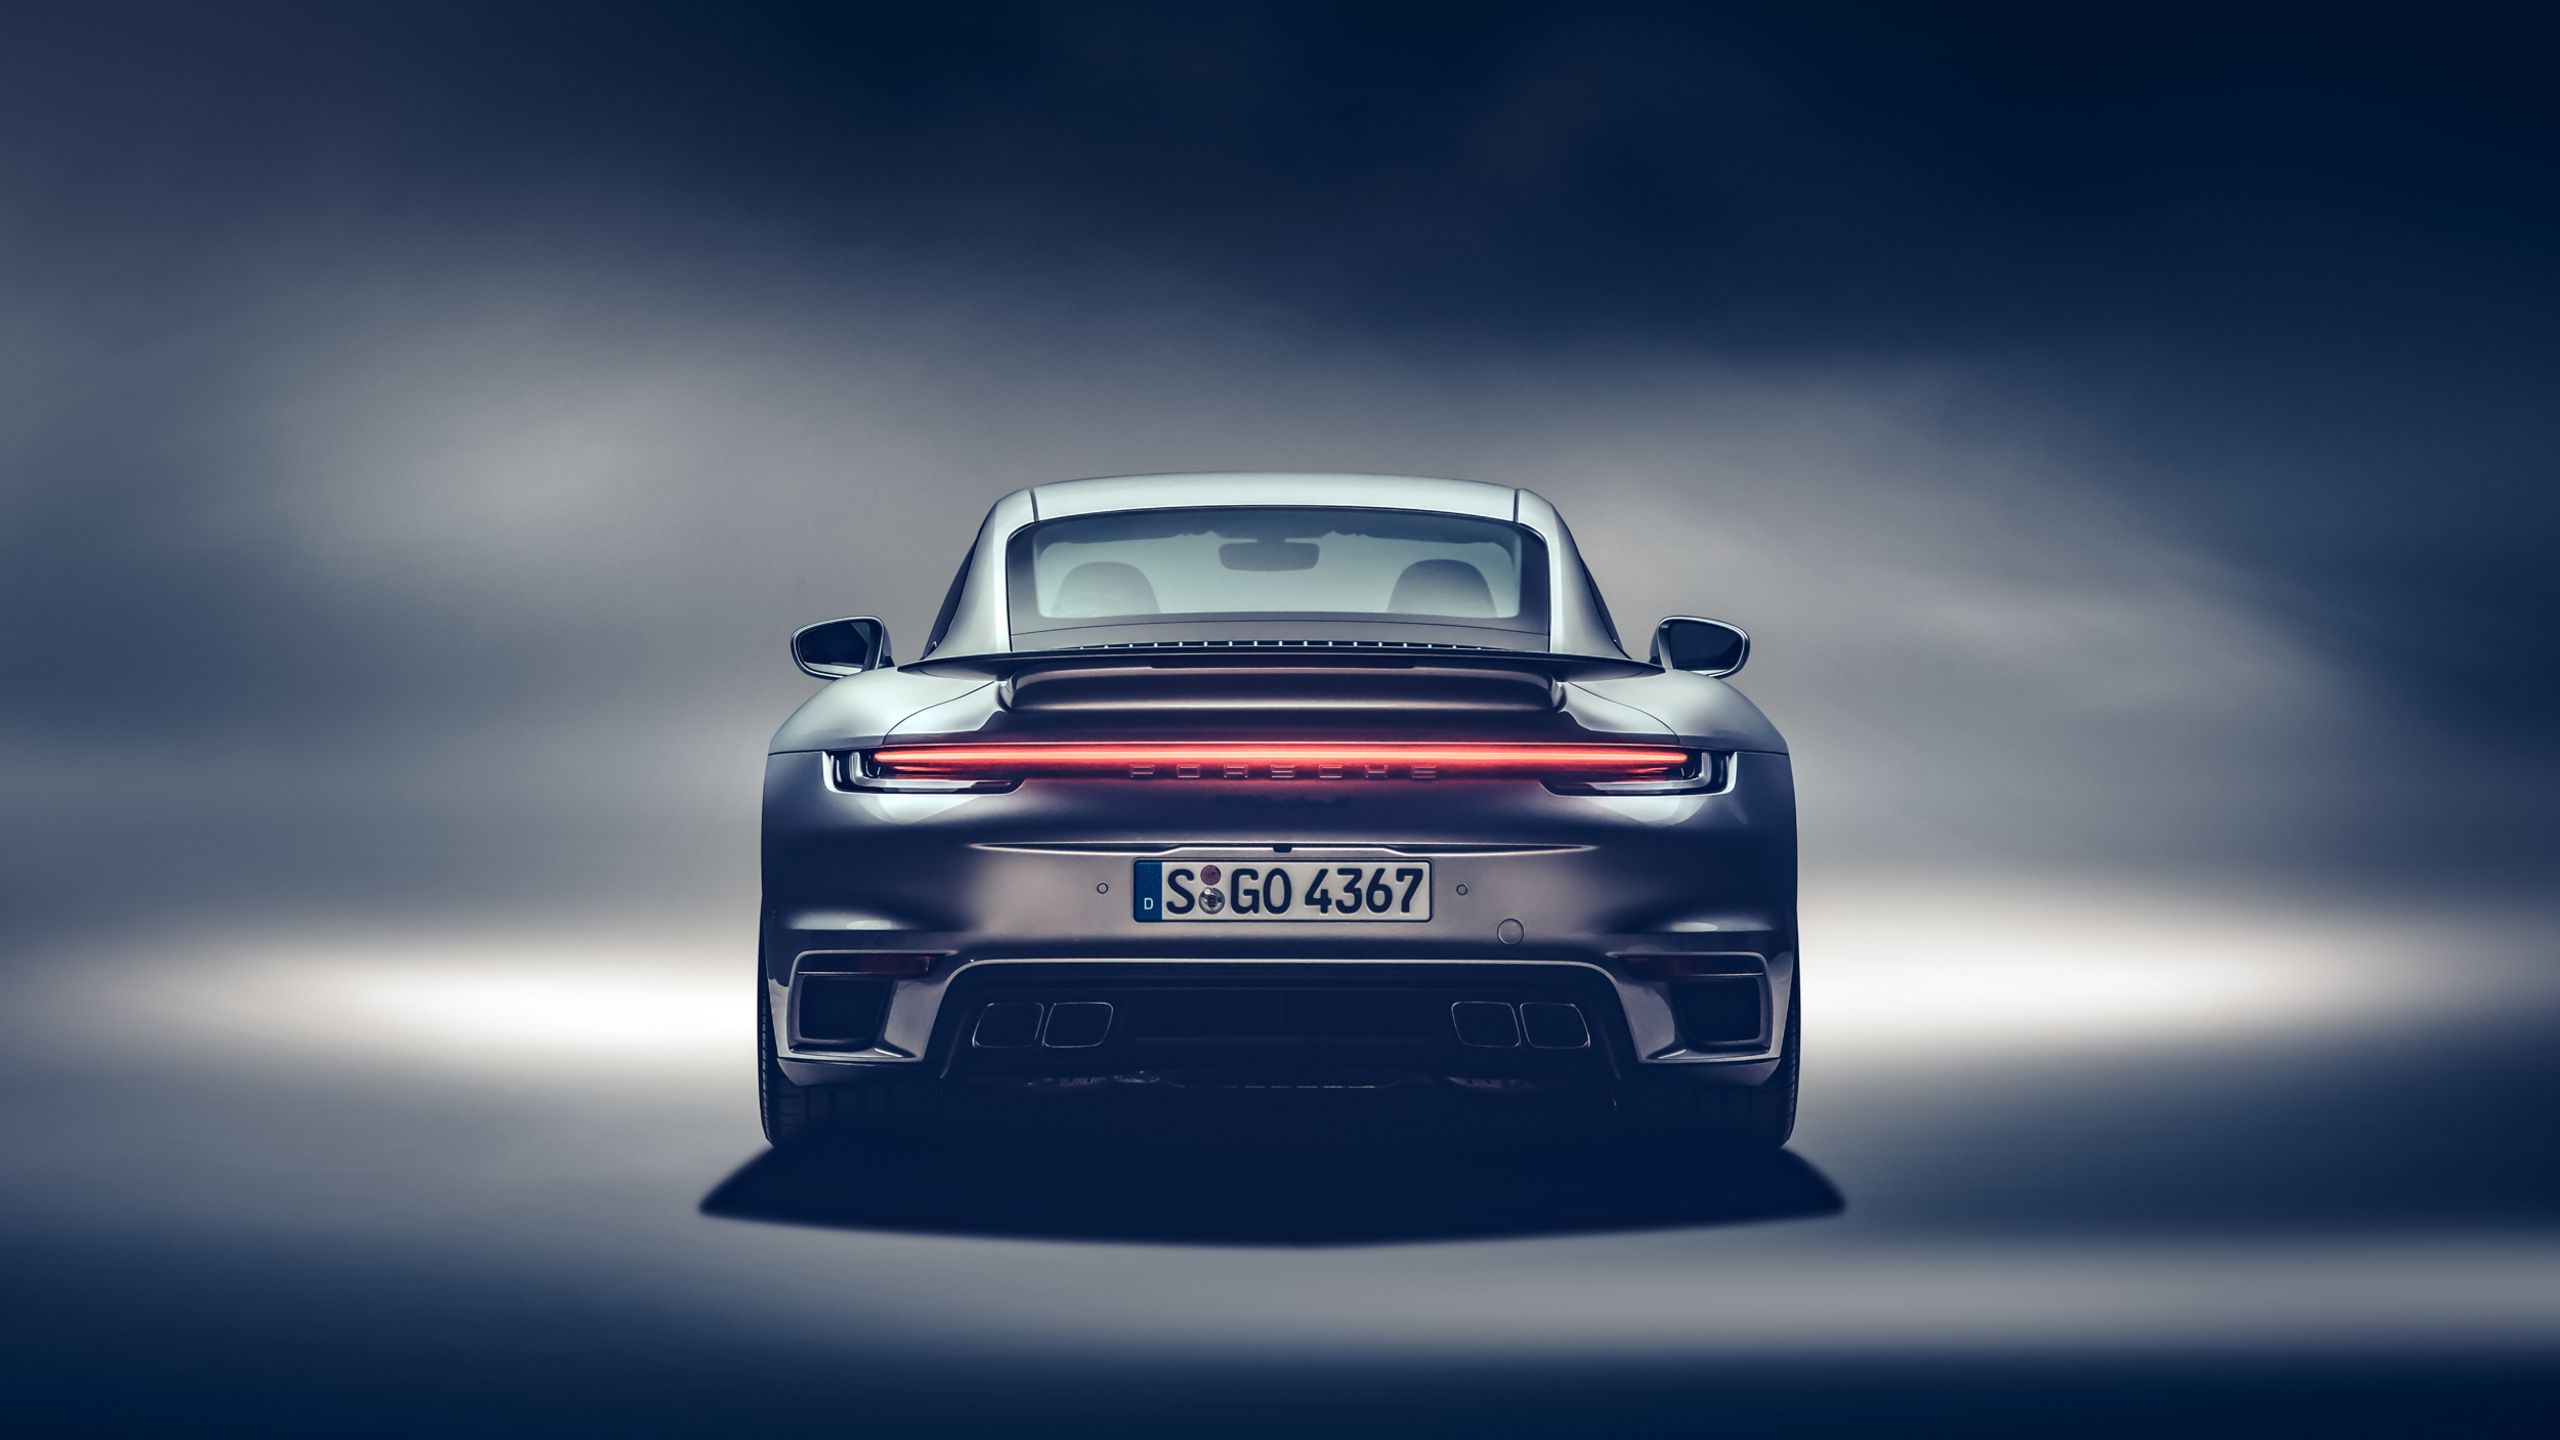 Porsche 911 Turbo S Rear 1440P Resolution HD 4k Wallpaper, Image, Background, Photo and Picture